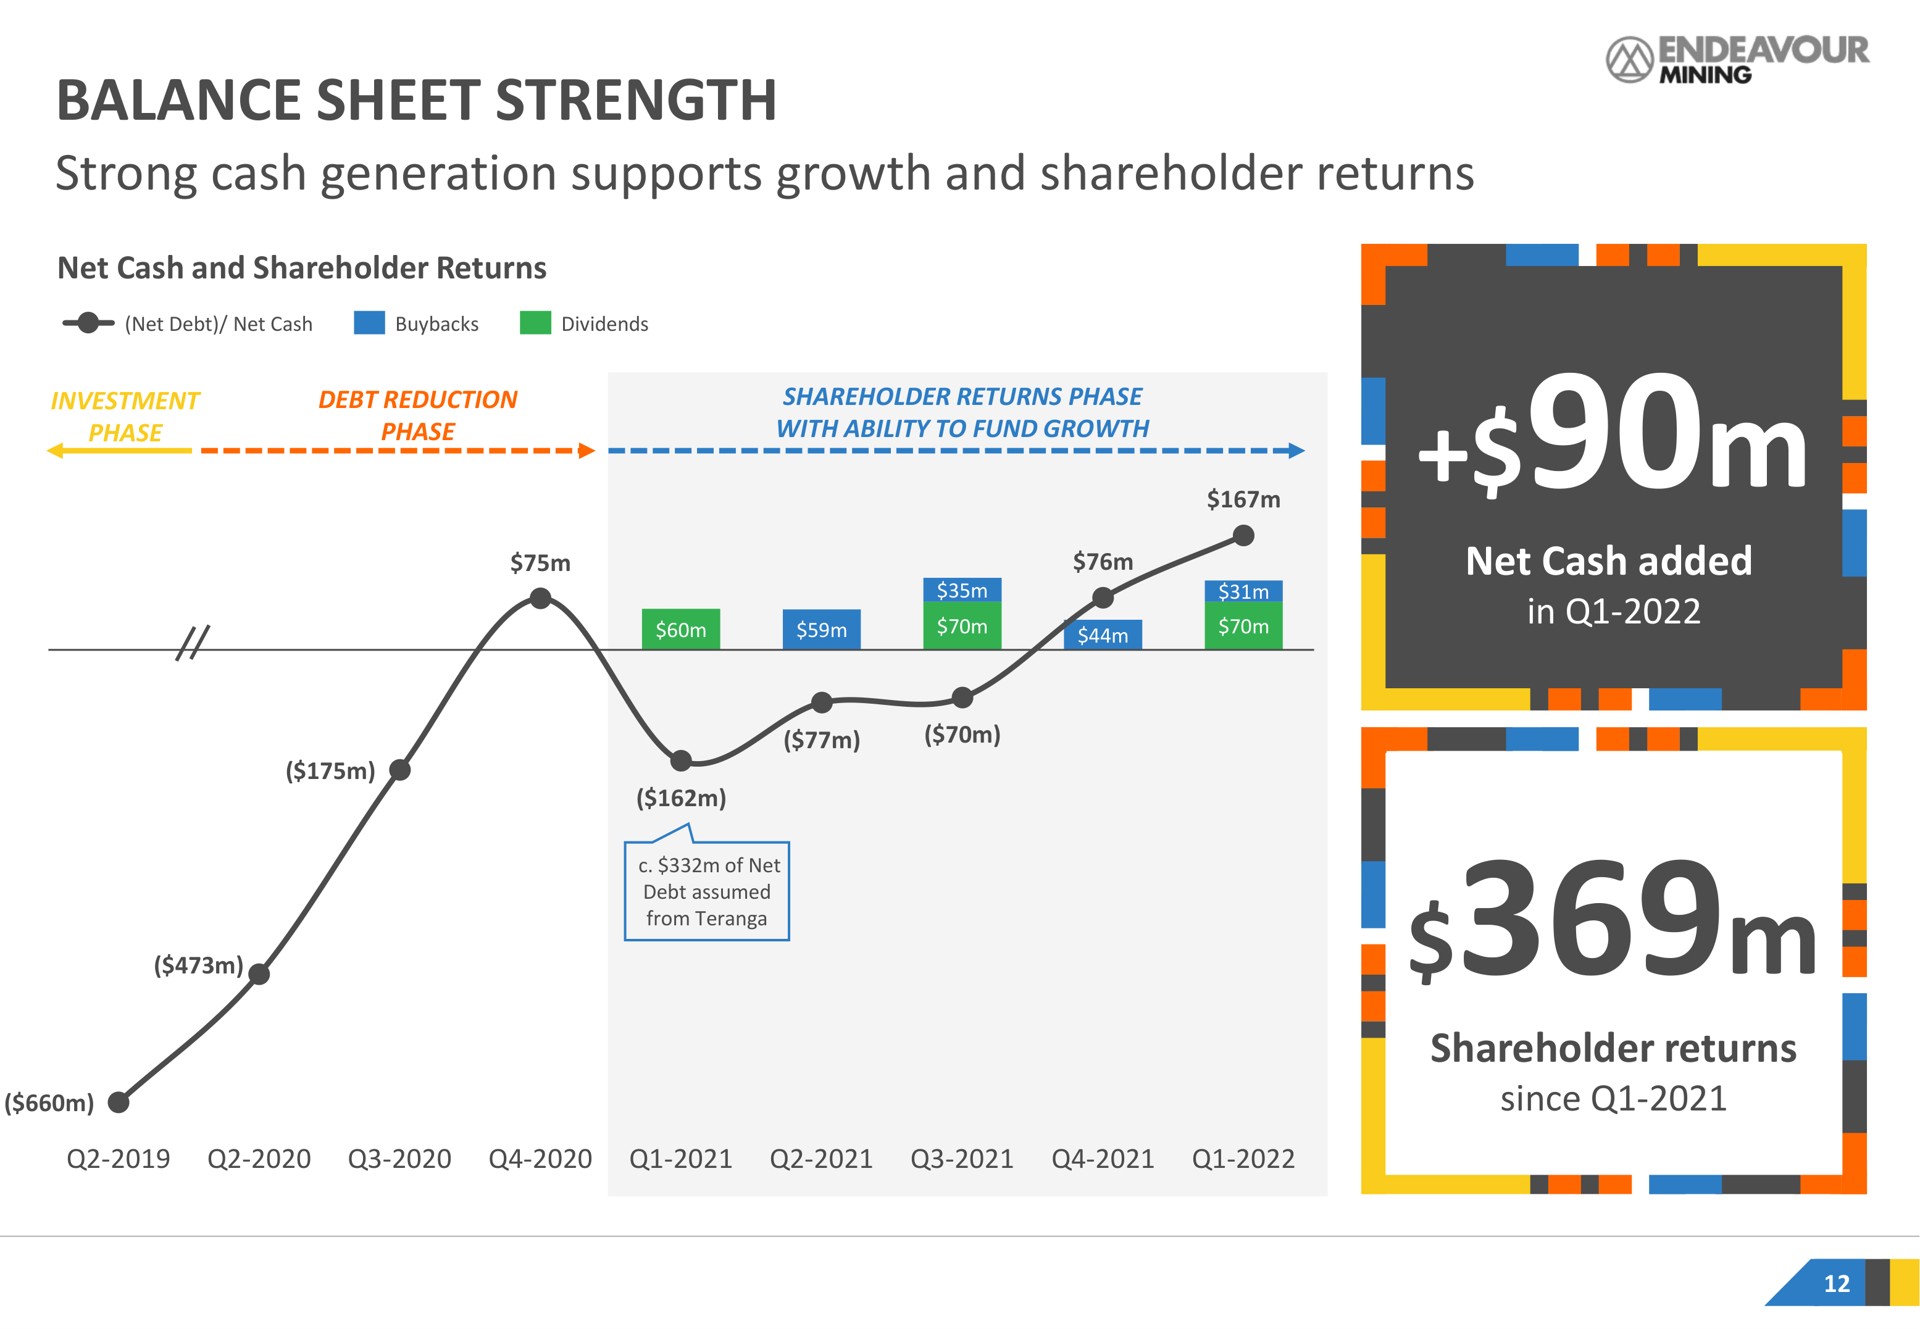 balance sheet strength strong cash generation supports growth and shareholder returns | Endeavour Mining